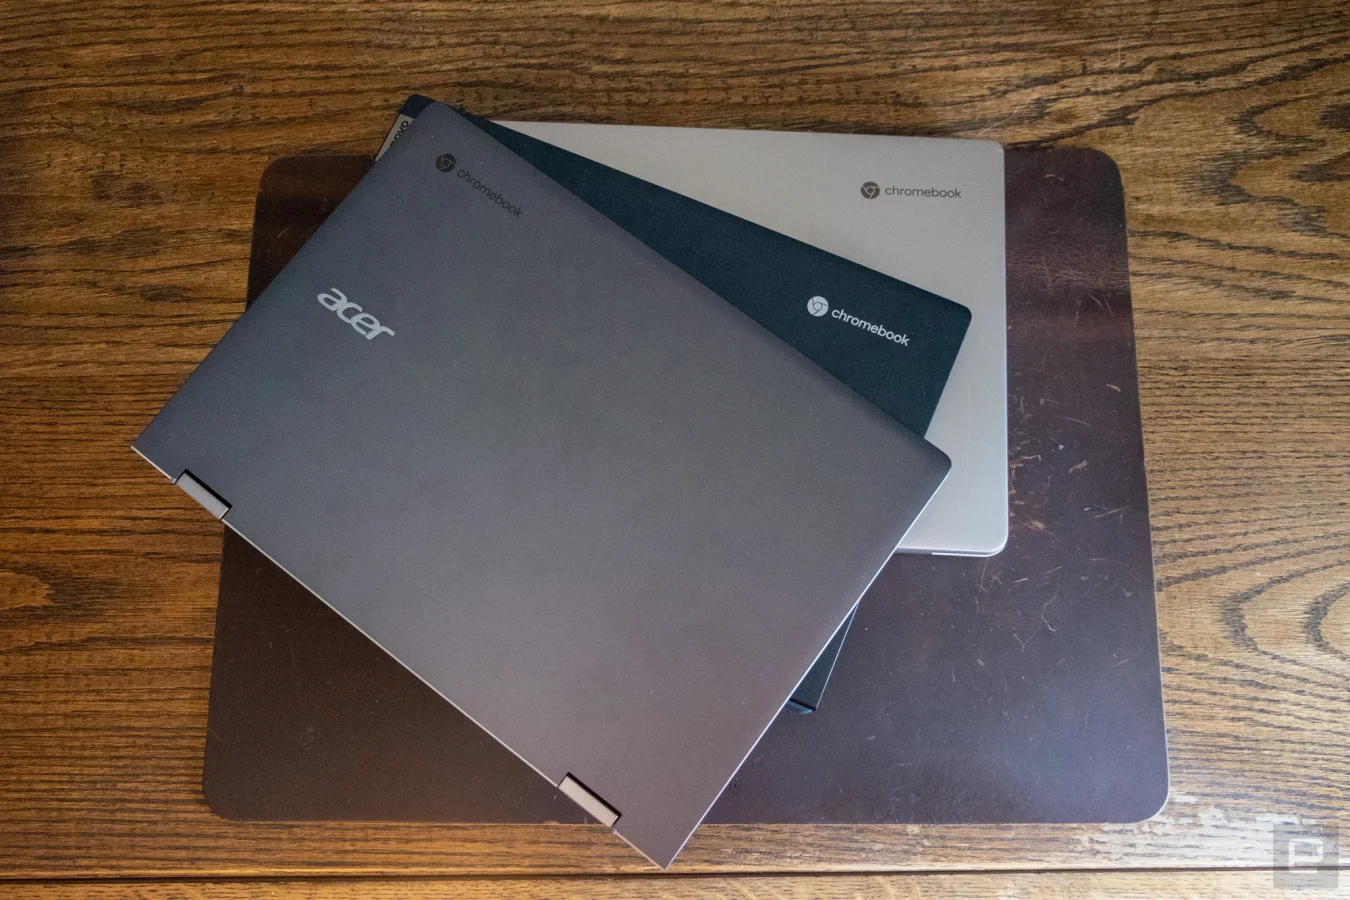 Three Chromebook laptops stacked on top of each other, fanning out a bit, on top of a desk protector on a wooden table.